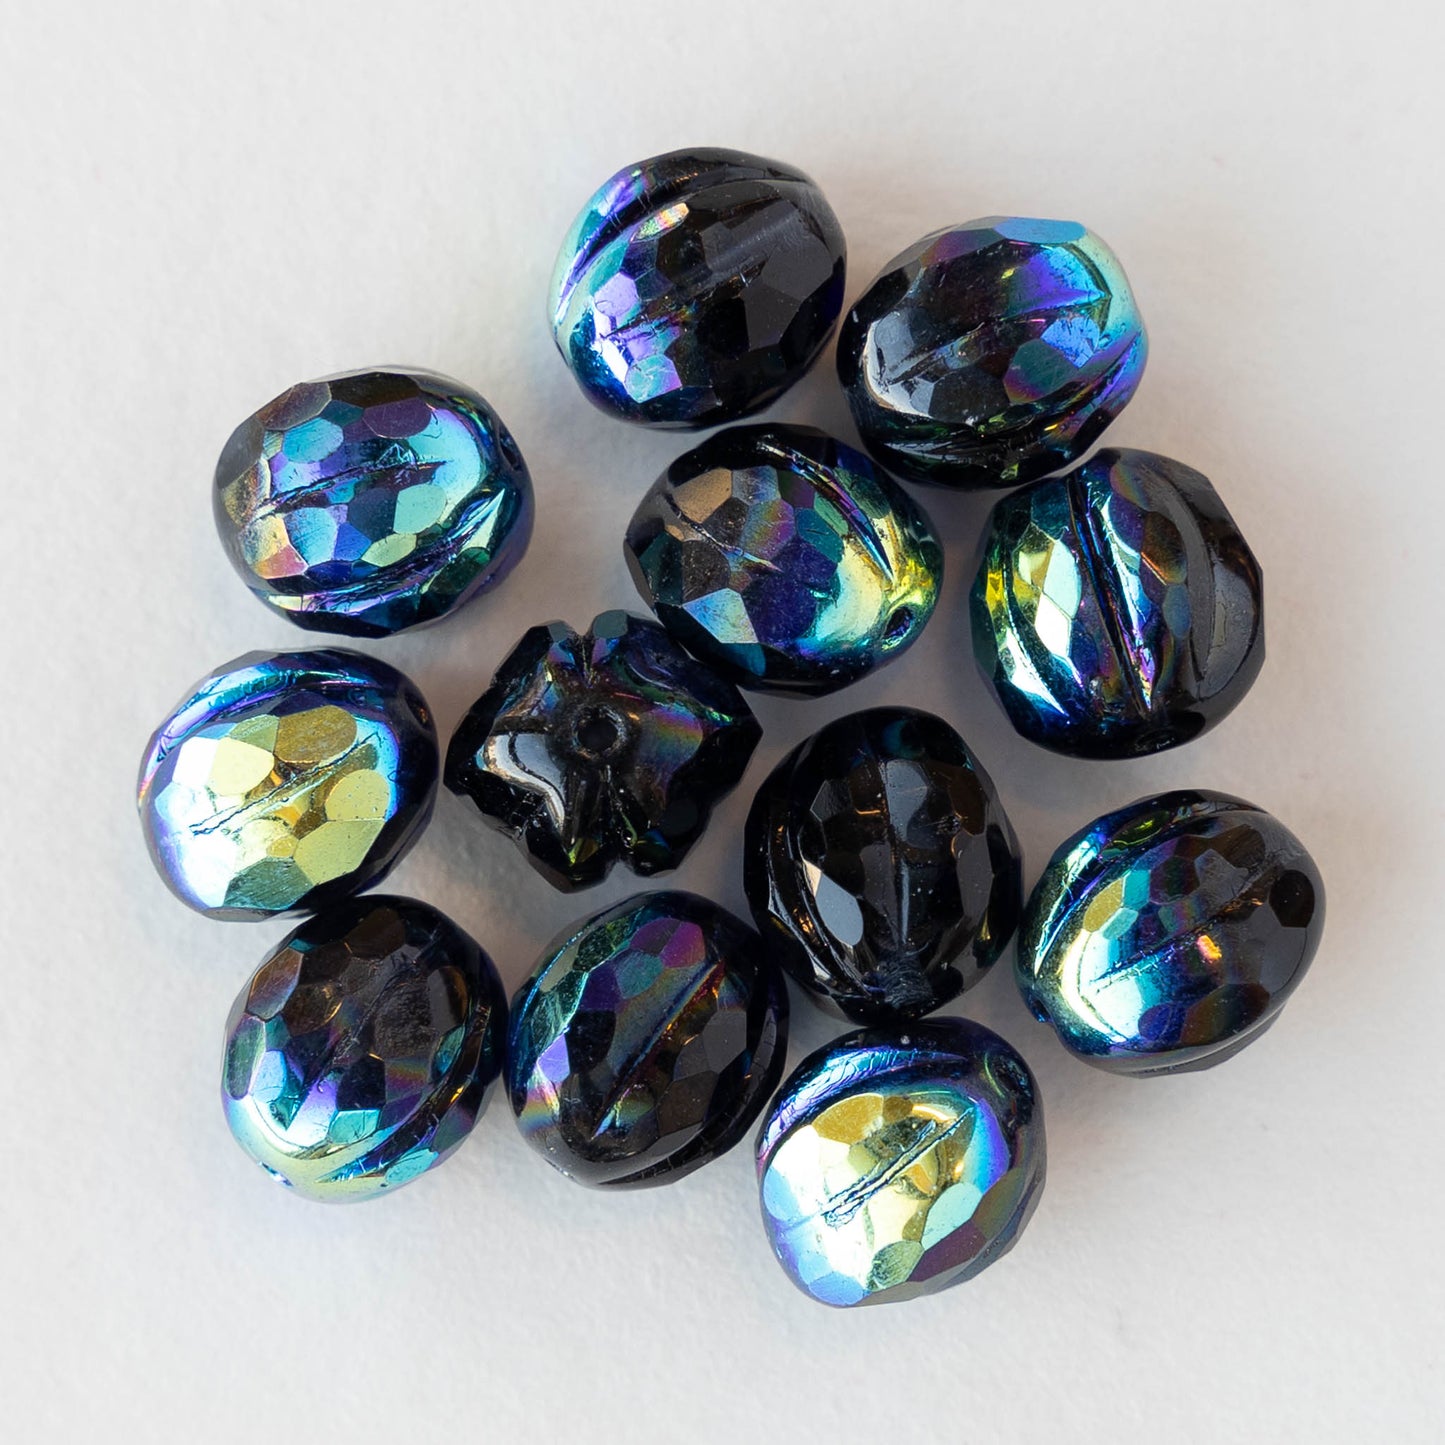 10mm Faceted Melon Beads - Black AB - 12